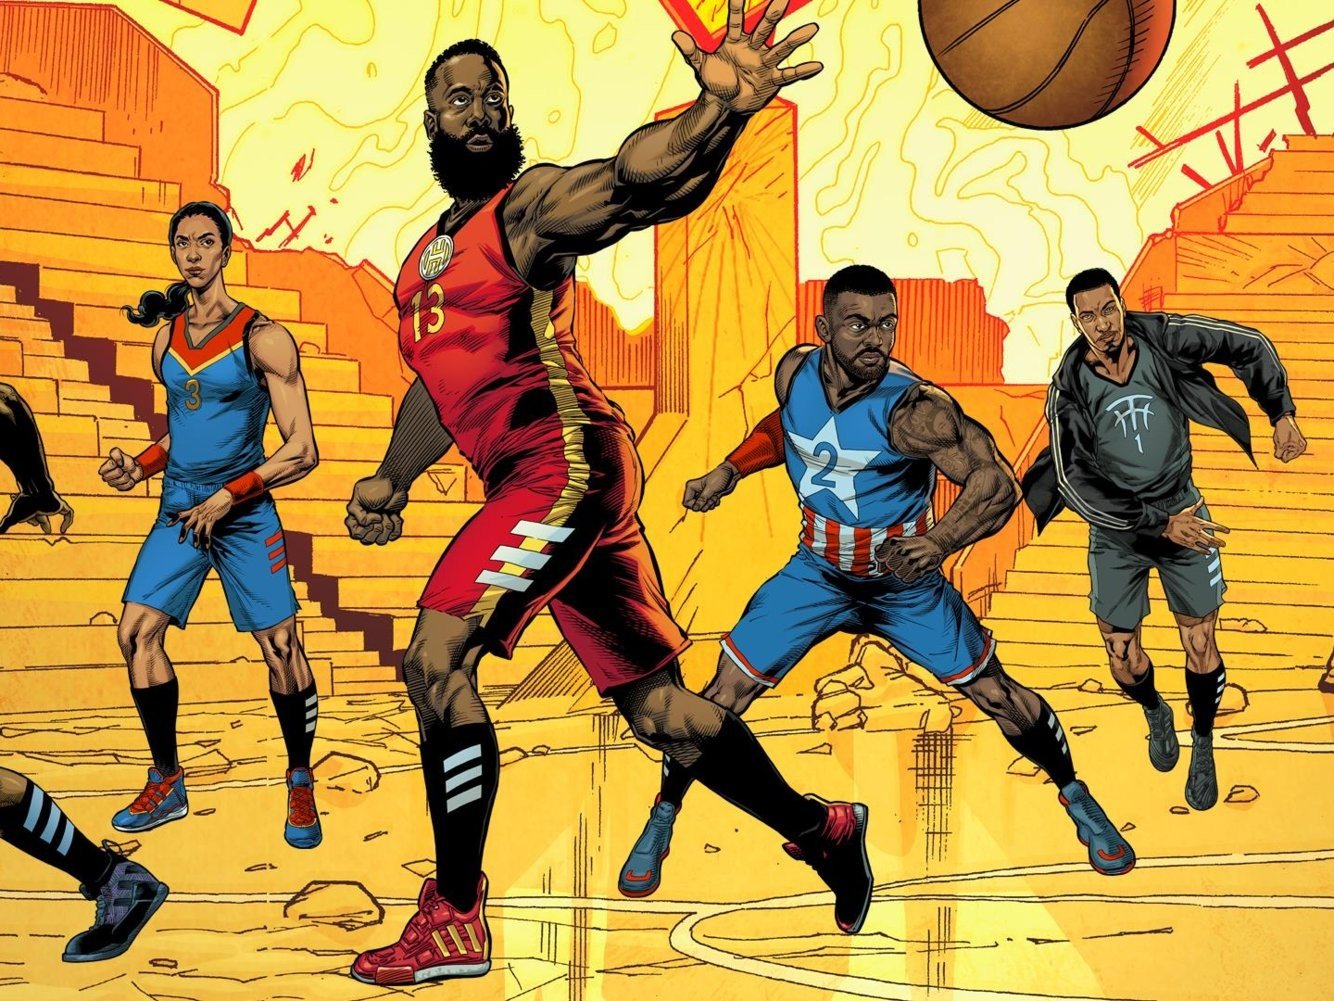 Adidas has teamed up with Marvel to launch a limited-edition collection of basketball sneakers. Inspired by Marvel superheroes, the ‘Heroes Among Us’ Collection uses the sneaker styles of some of its signature athletes – James Harden, Damian Lillard, John Wall, Candace Parker and Tracy McGrady – to create a six-sneaker collection.